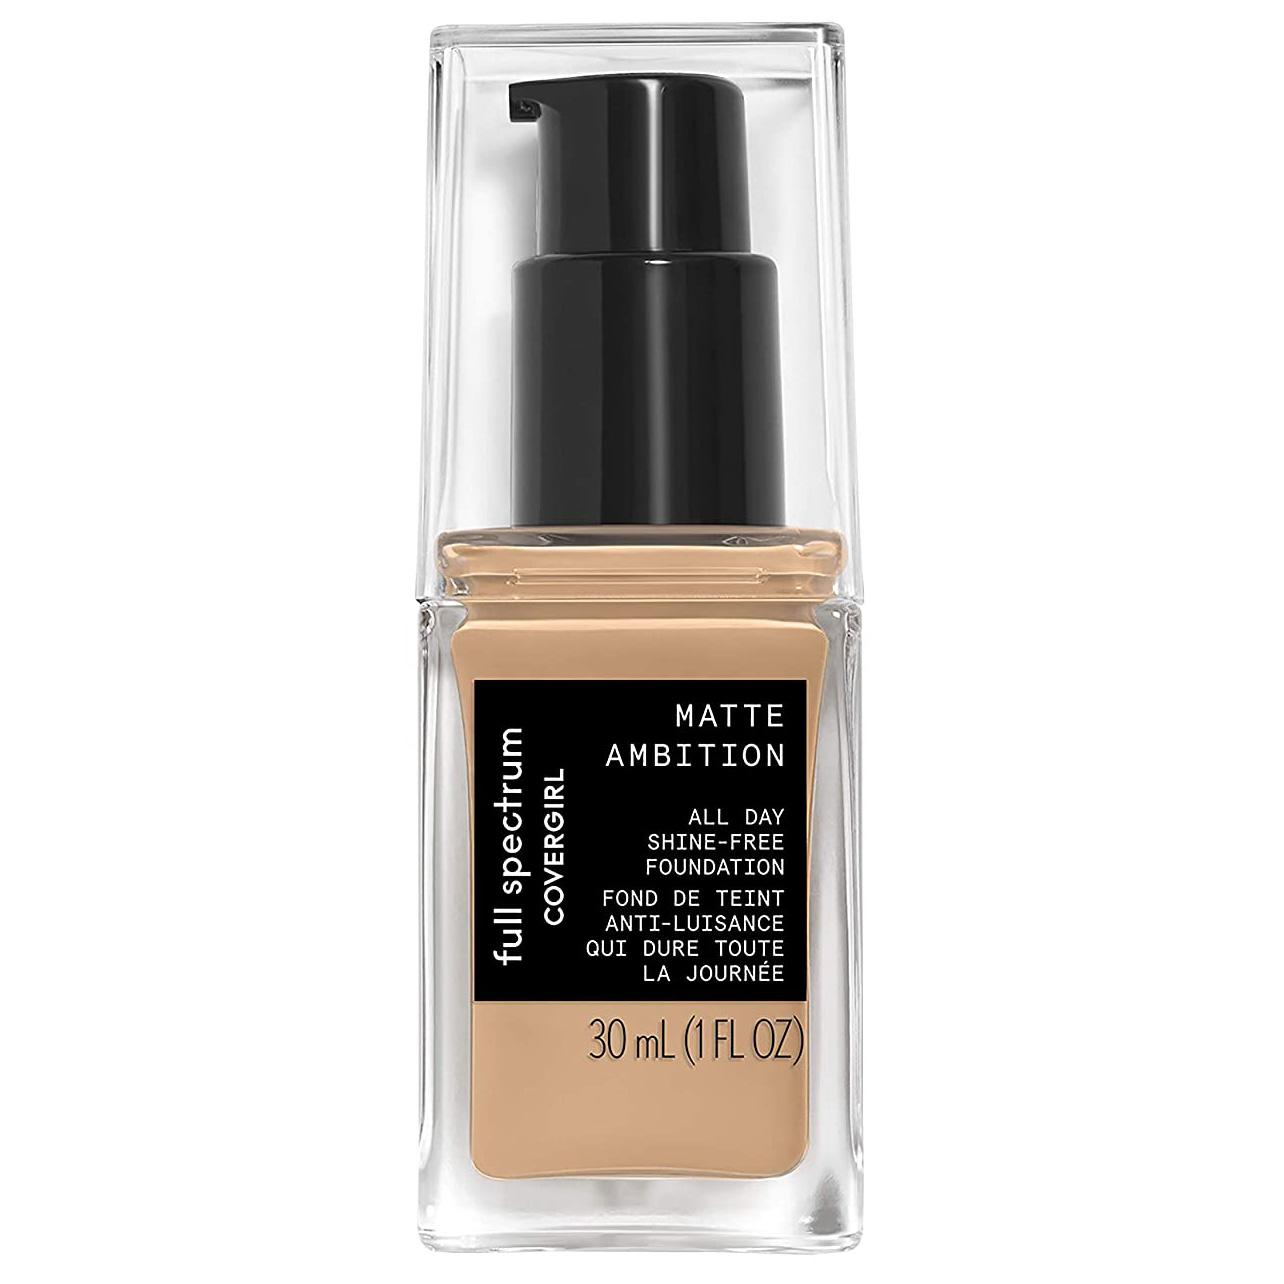 Covergirl Matte Ambition All Day Foundation for $5.69 Shipped